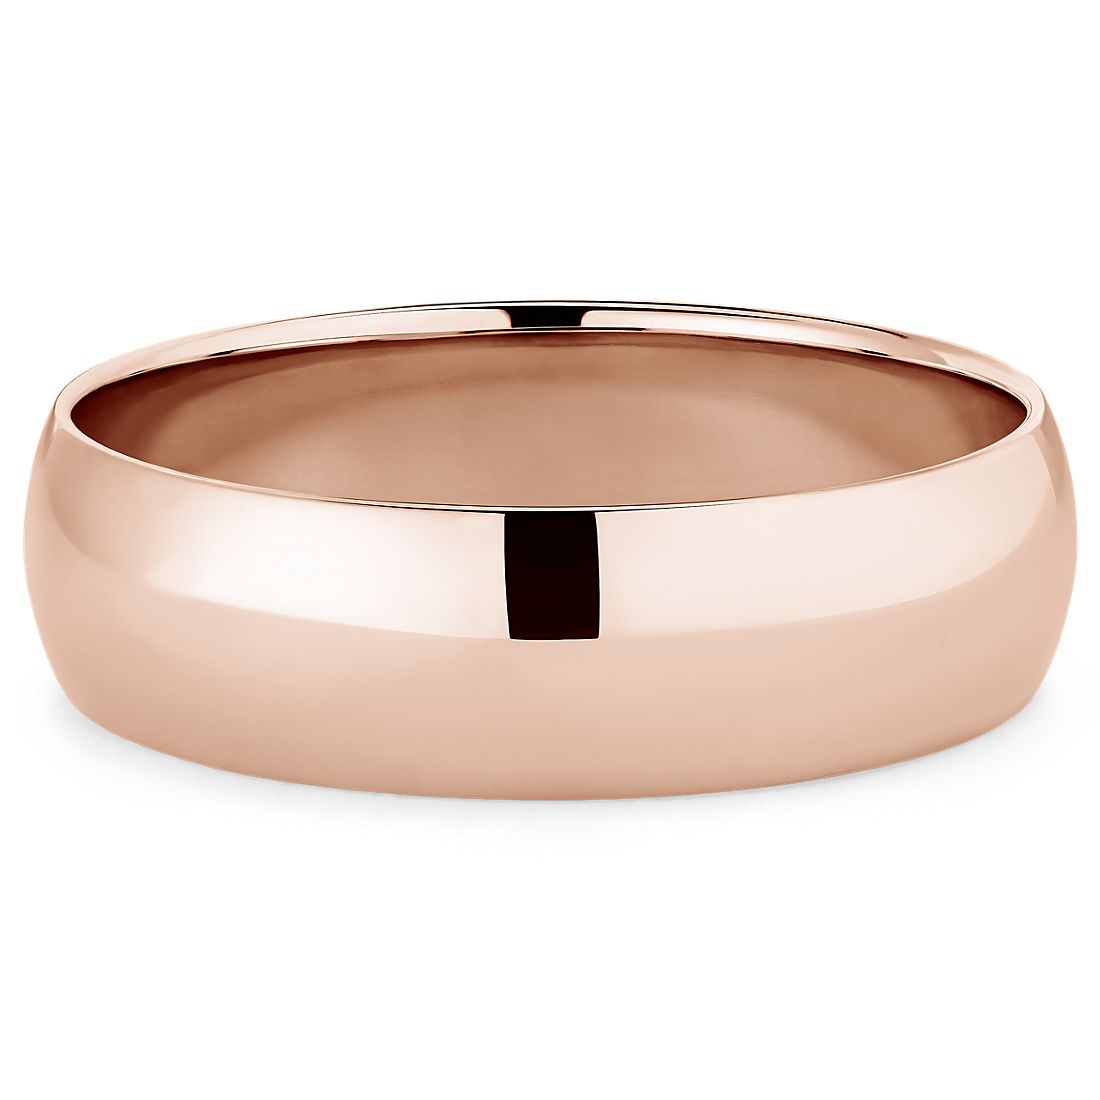 Classic Wedding Ring in 14k Rose Gold (6 mm)